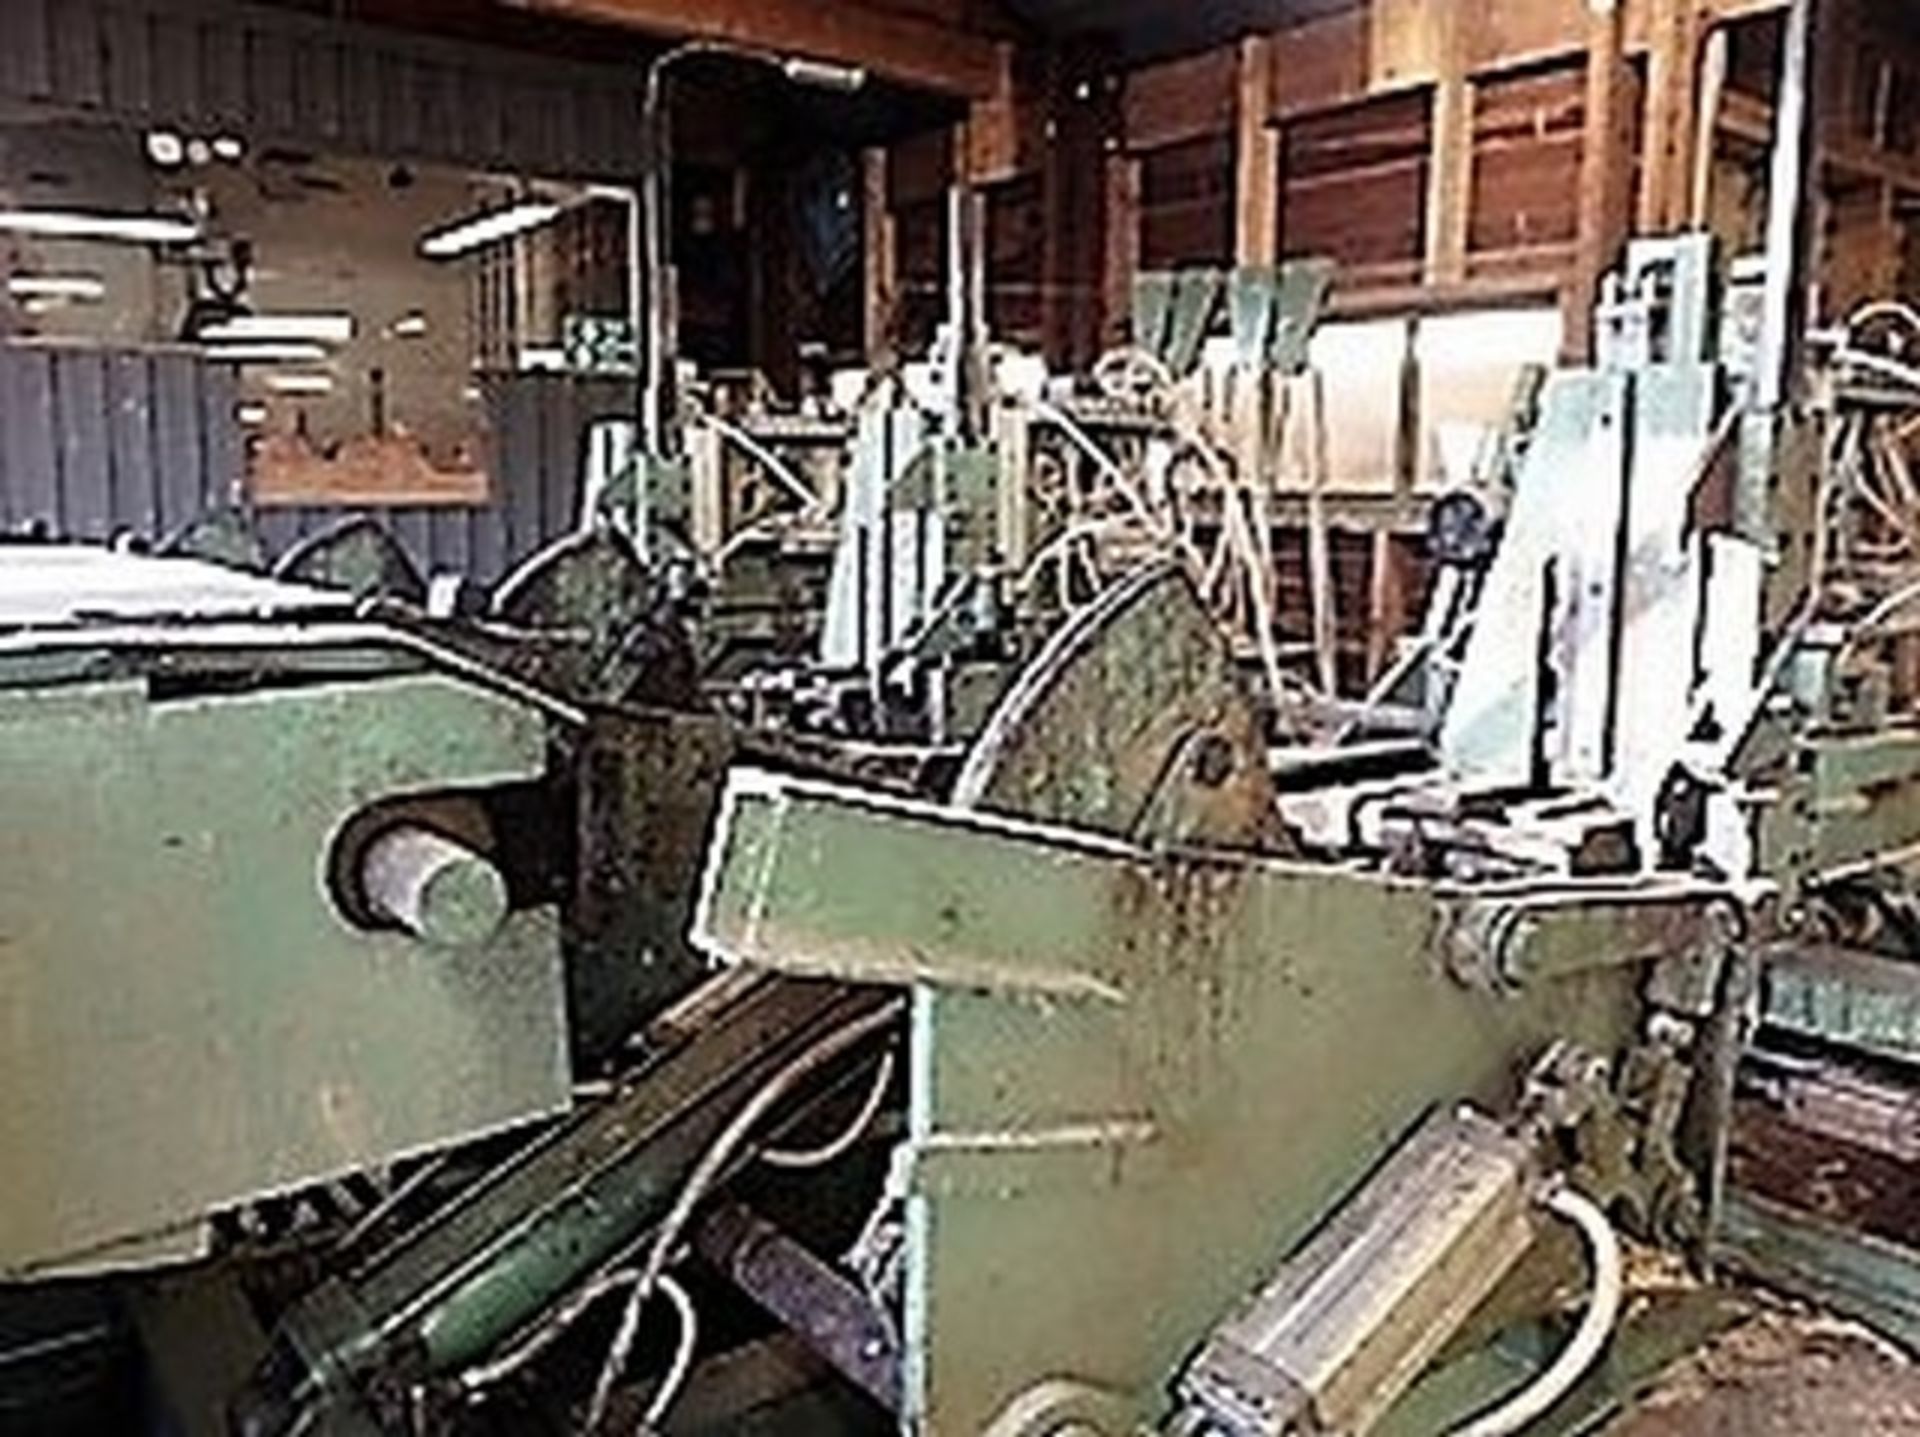 Stenner 54" Bandmill with Stenner carriage cable driven with pneumatic controls - Image 6 of 25